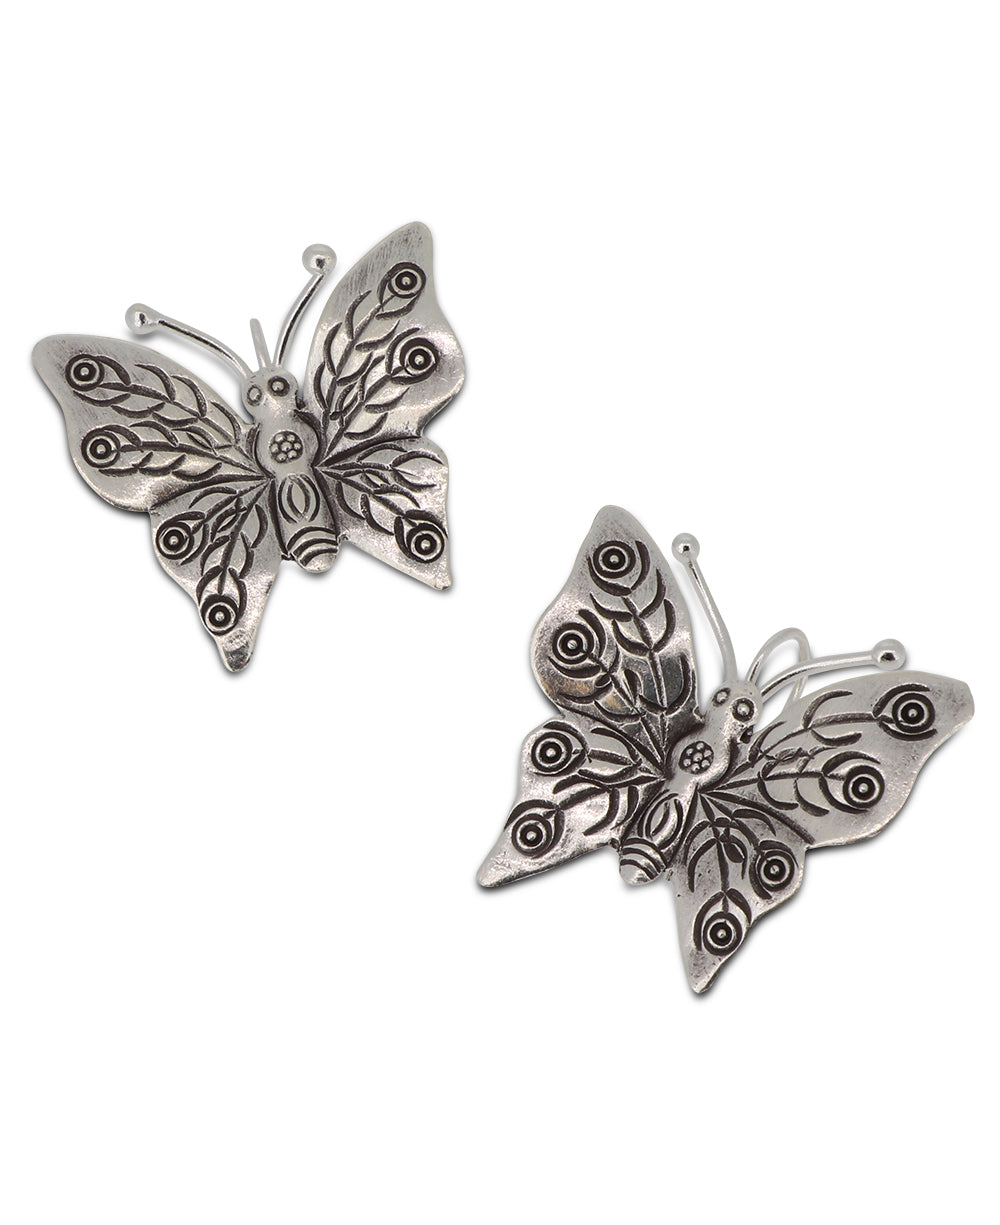 Laotian hill tribe silver butterfly design earrings with elegant etching